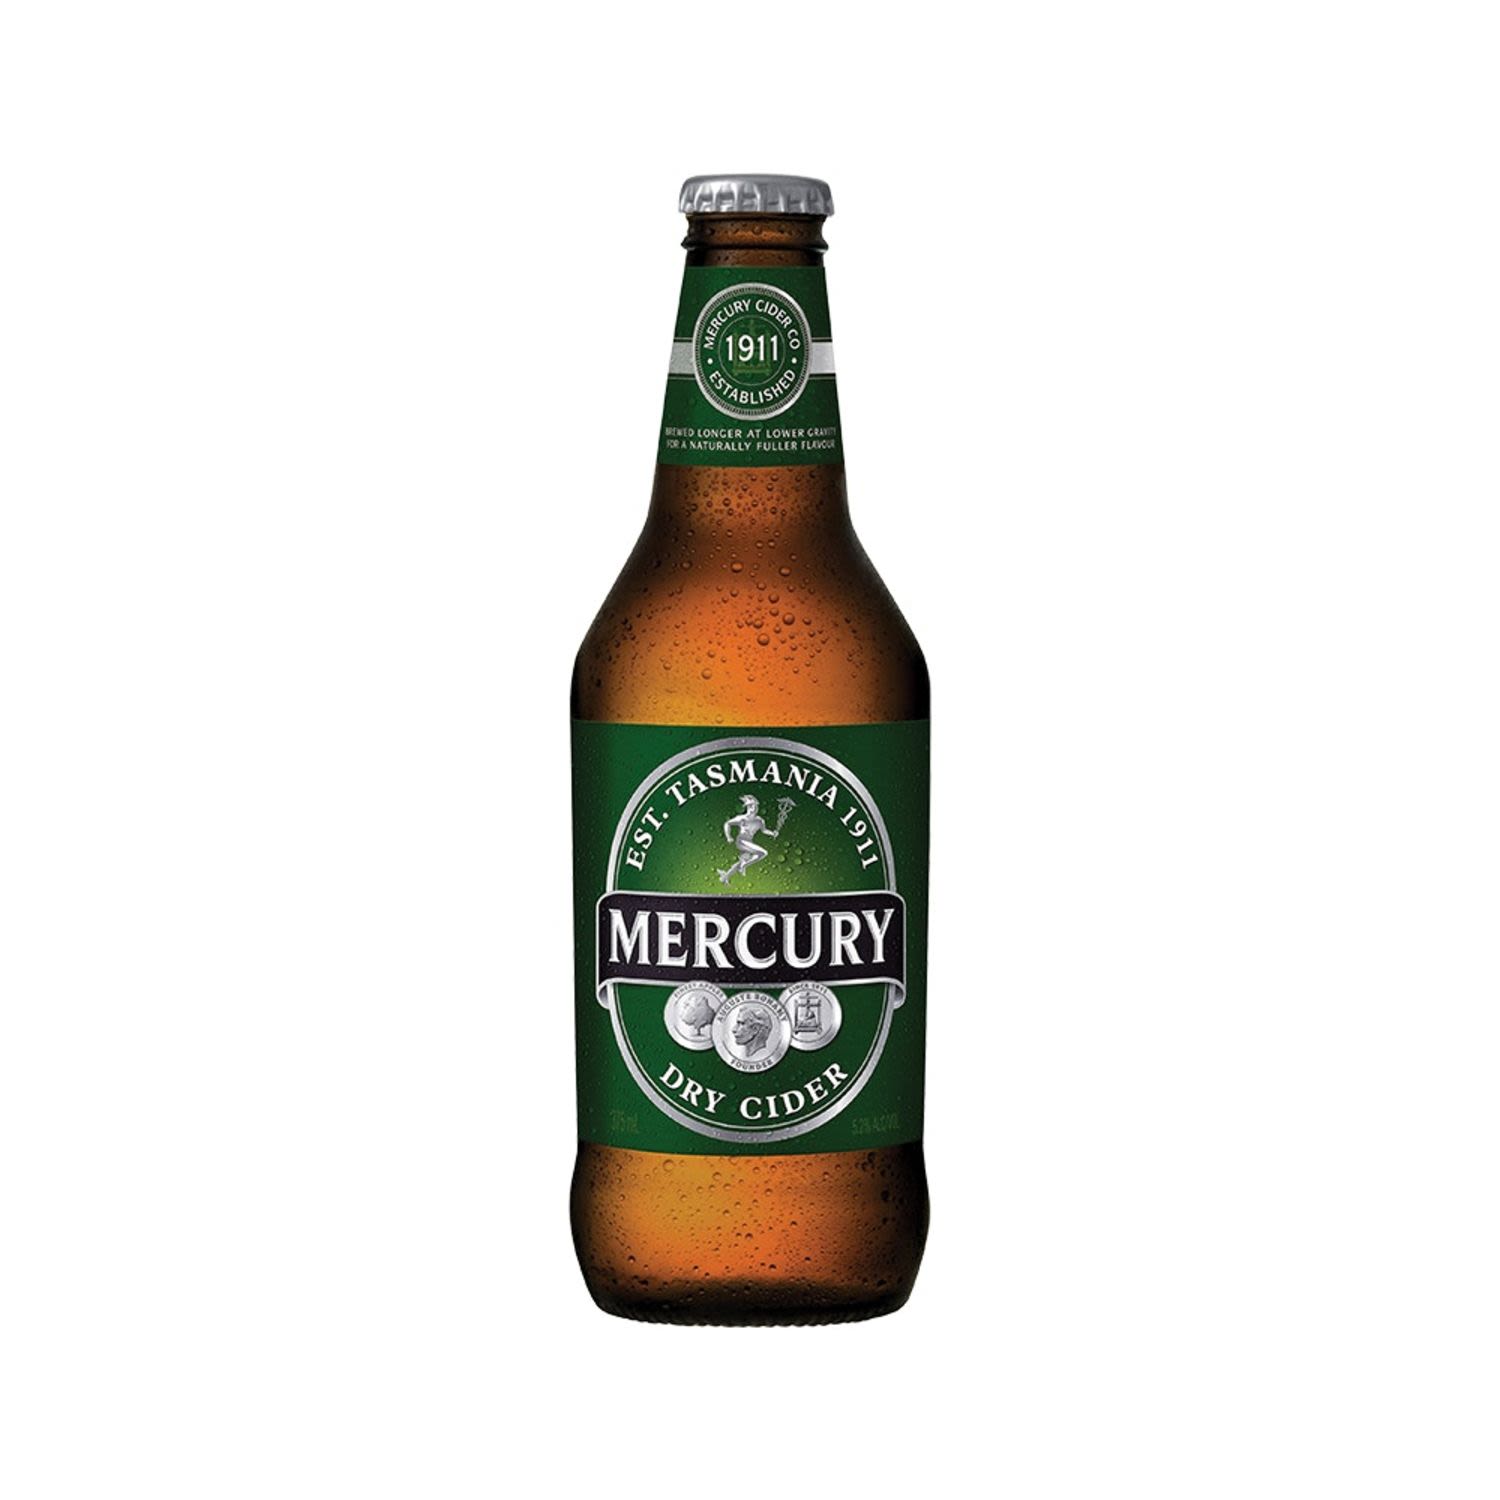 Fresh green apples with clean dry finish and those pure Tasmanian waters show through on the palate. Underrated dry Cider from the apple aisle. Drink cold in a big glass.<br /> <br />Alcohol Volume: 5.20%<br /><br />Pack Format: Bottle<br /><br />Standard Drinks: 1.5</br /><br />Pack Type: Bottle<br /><br />Country of Origin: Australia<br />